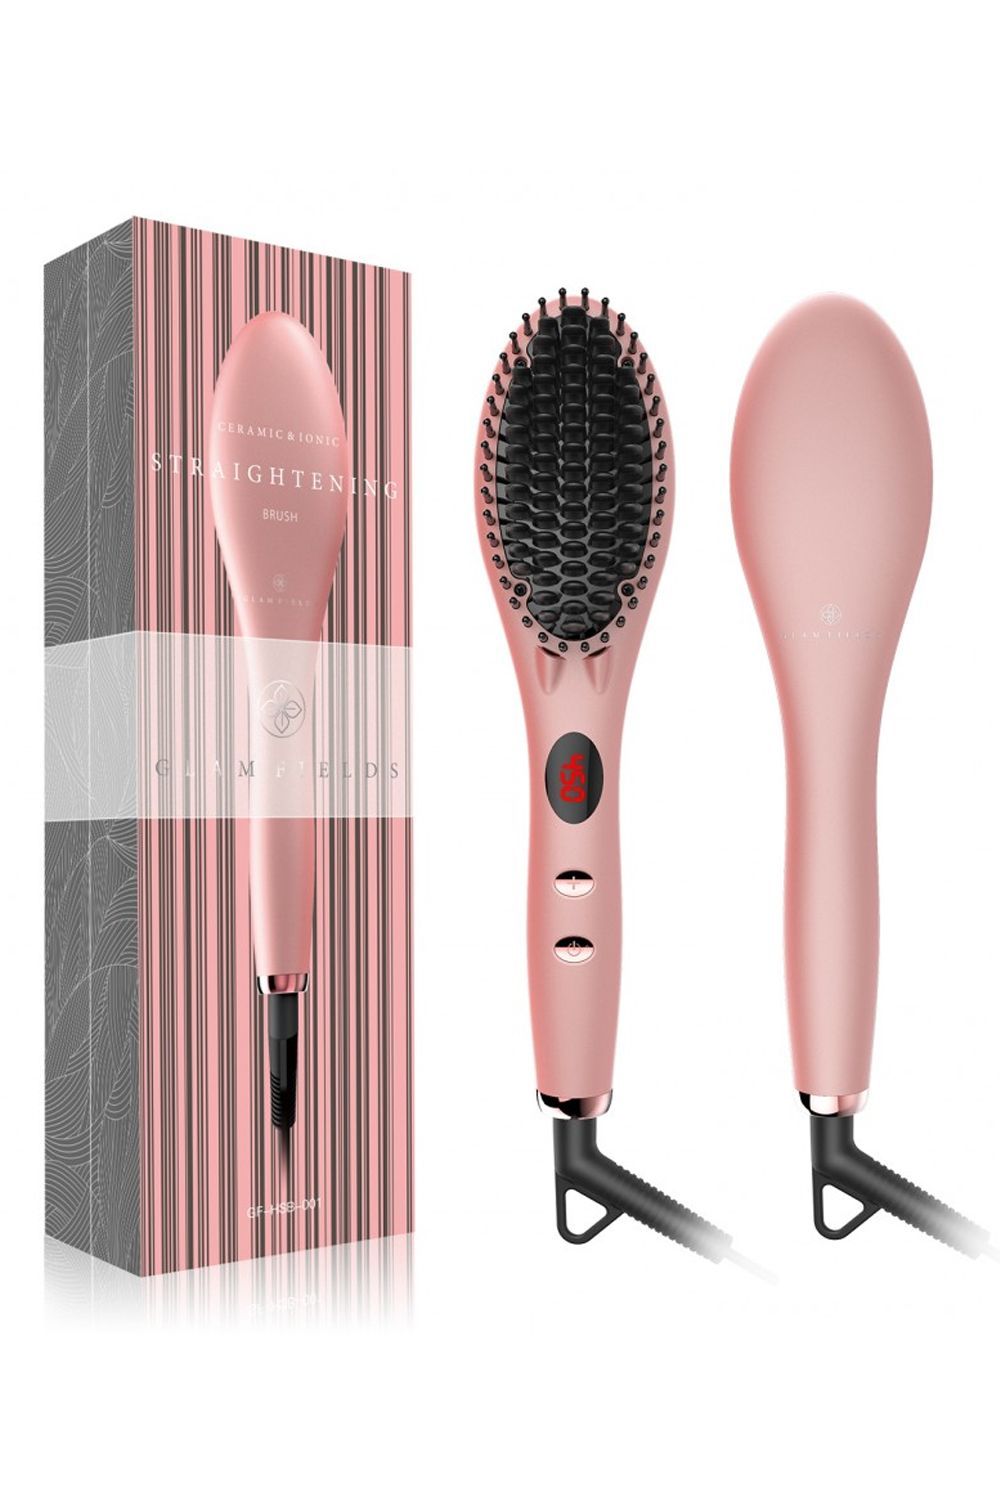 Hair straightening brush Hair straightening brushes with hair care  technology  The Economic Times